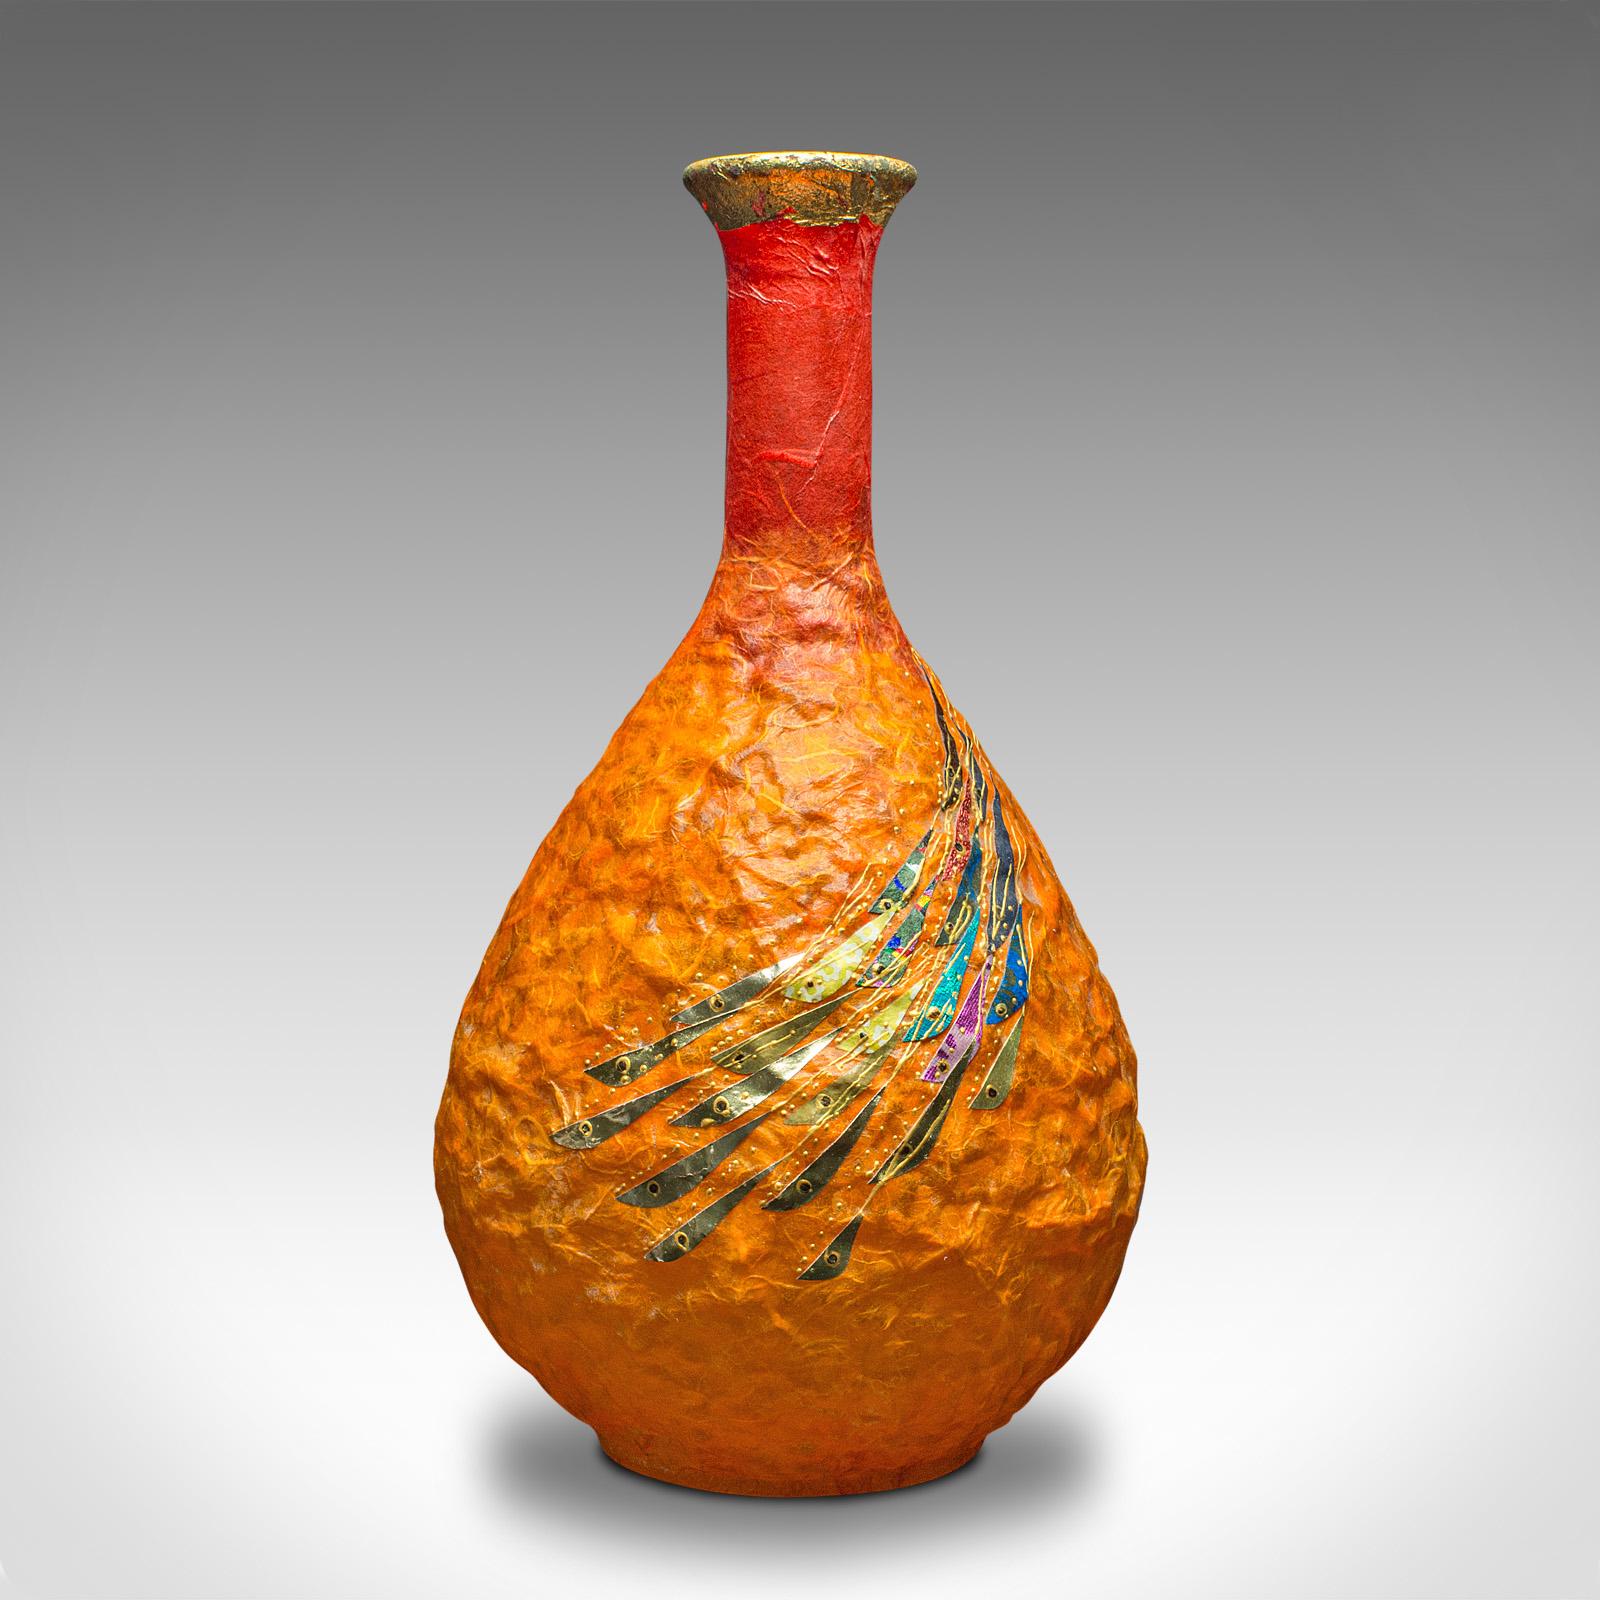 This is a contemporary bulb posy vase. An English, art glass and straw silk decorative urn by Margaret Johnson.

Superb colour with the artist's signature fish shoal motif
Displaying a desirable, contemporary appearance and in good order
Attractive